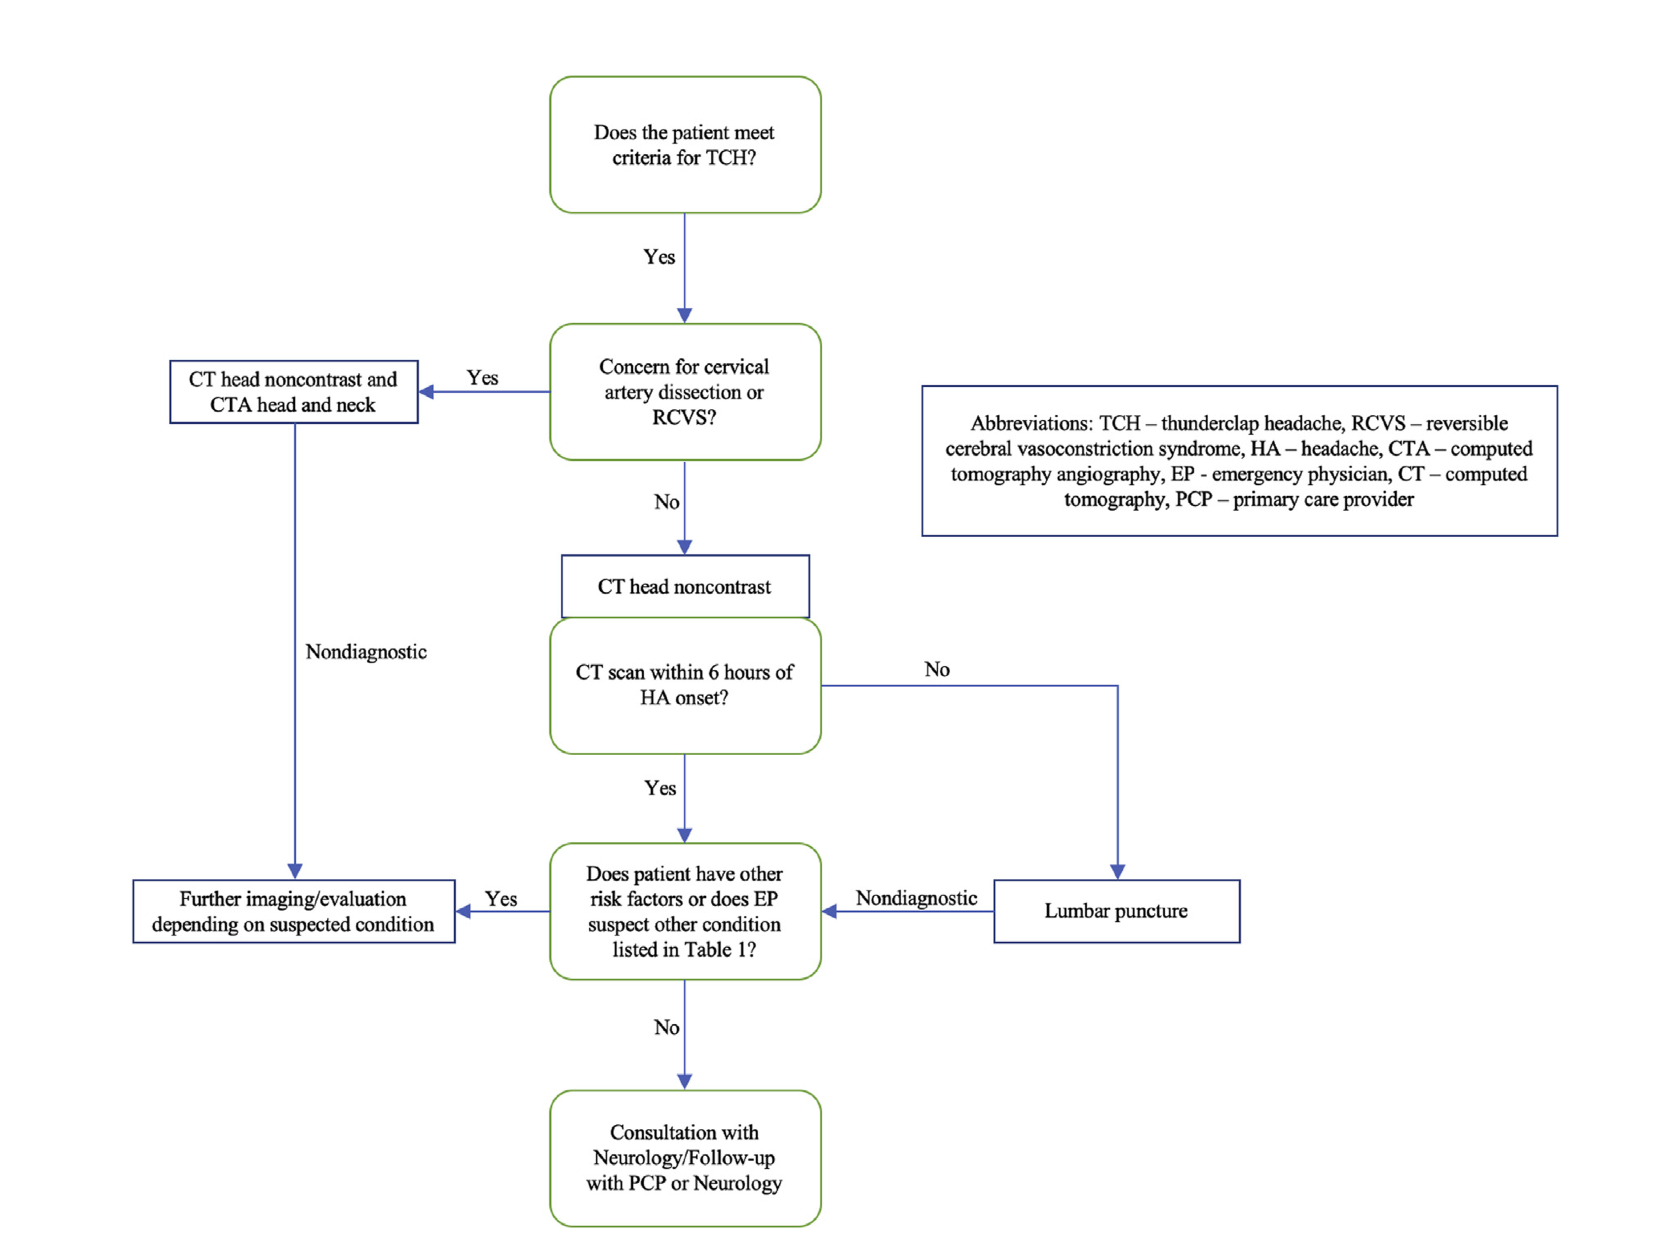 From cited article - Diagnostic evaluation of thunderclap headache